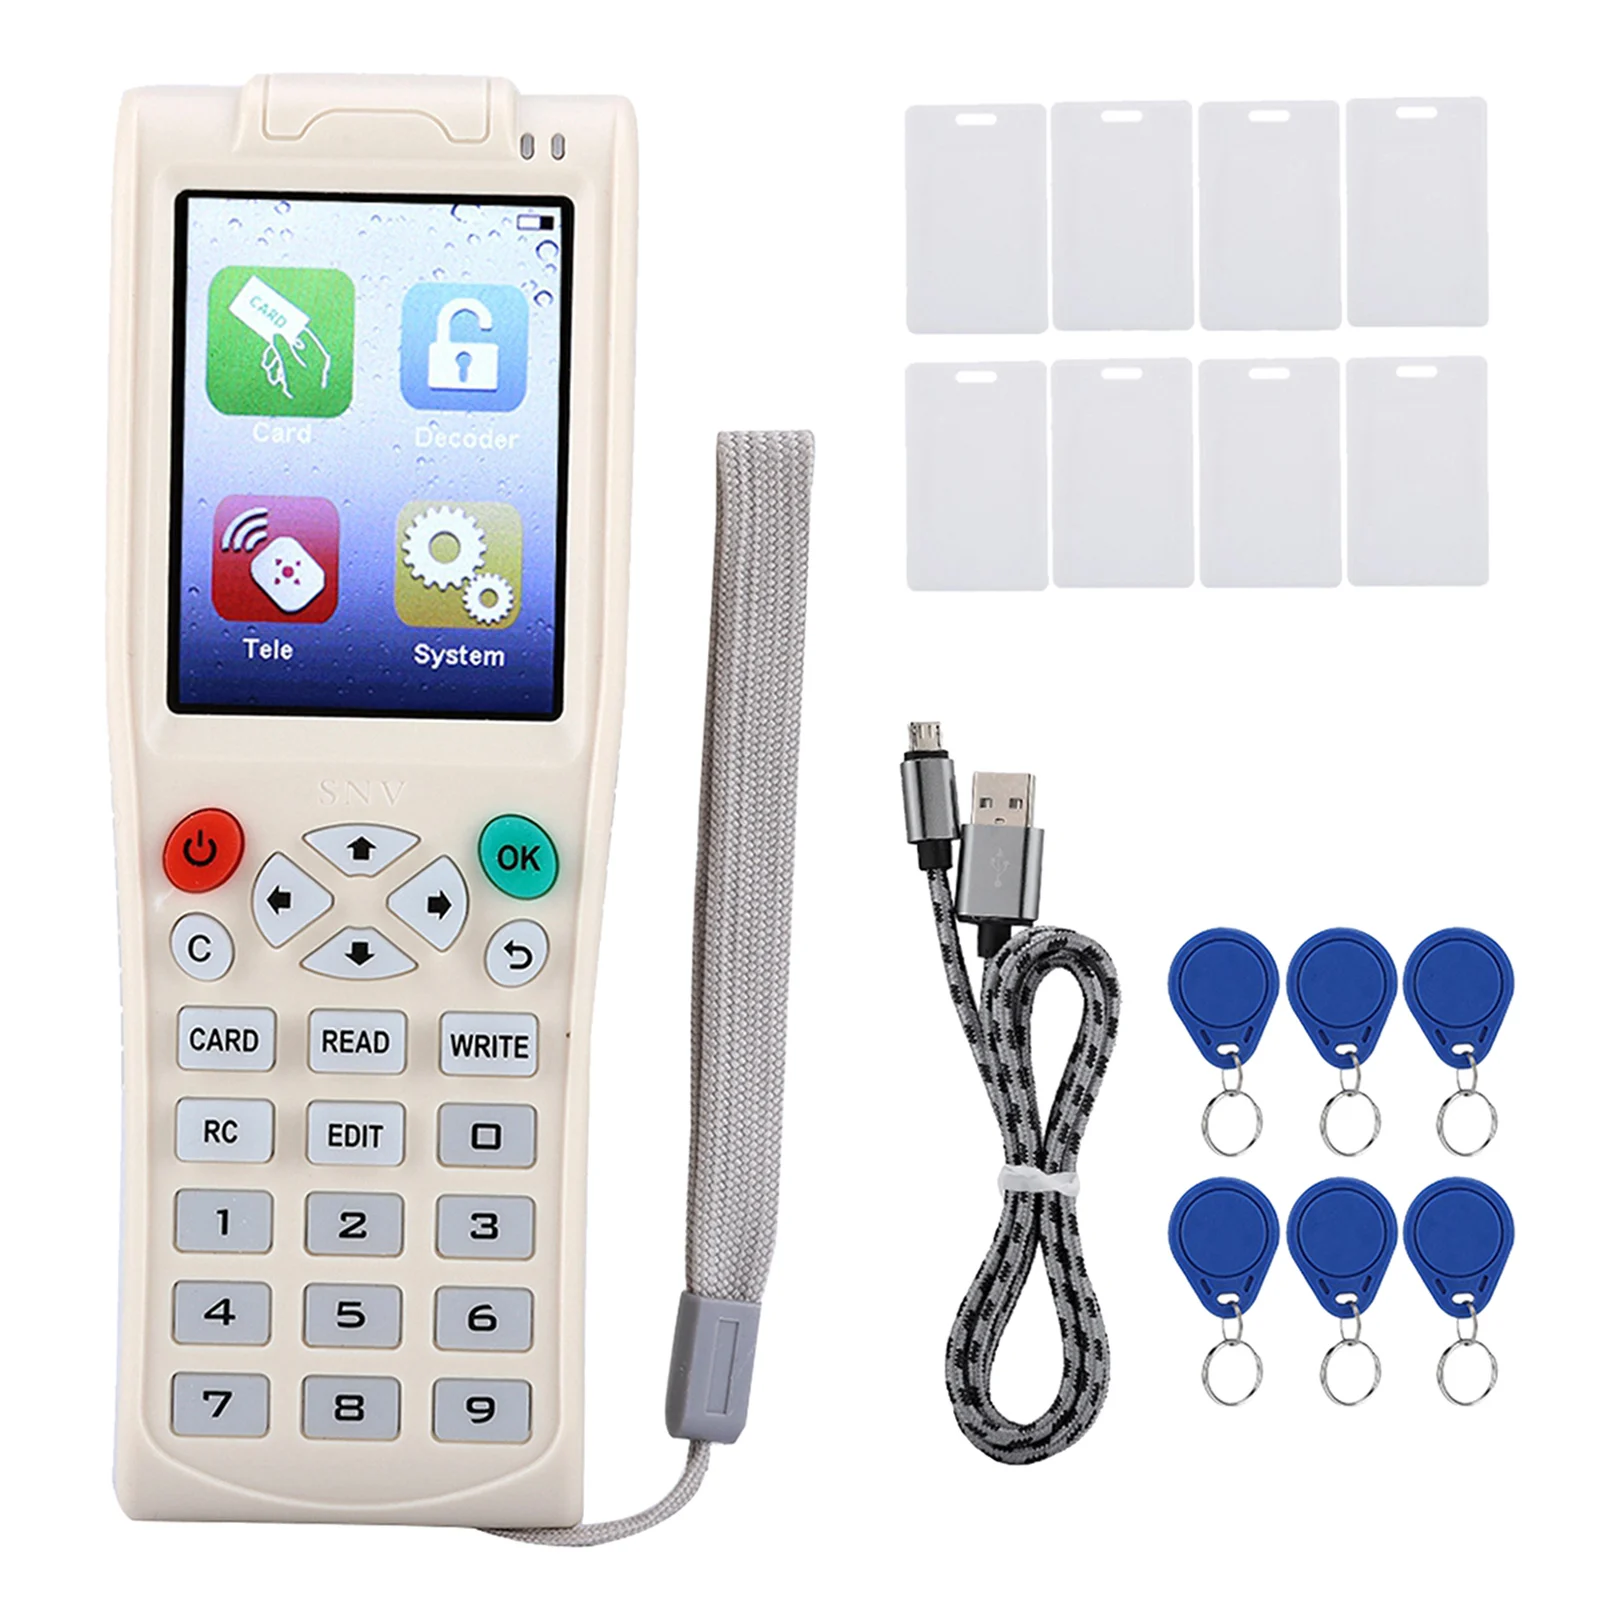 Handheld RFID Card Reader Writer Copier Duplicator Recordable Access Control System for ID Card 4100, 8265, 5200, 5577, 8268